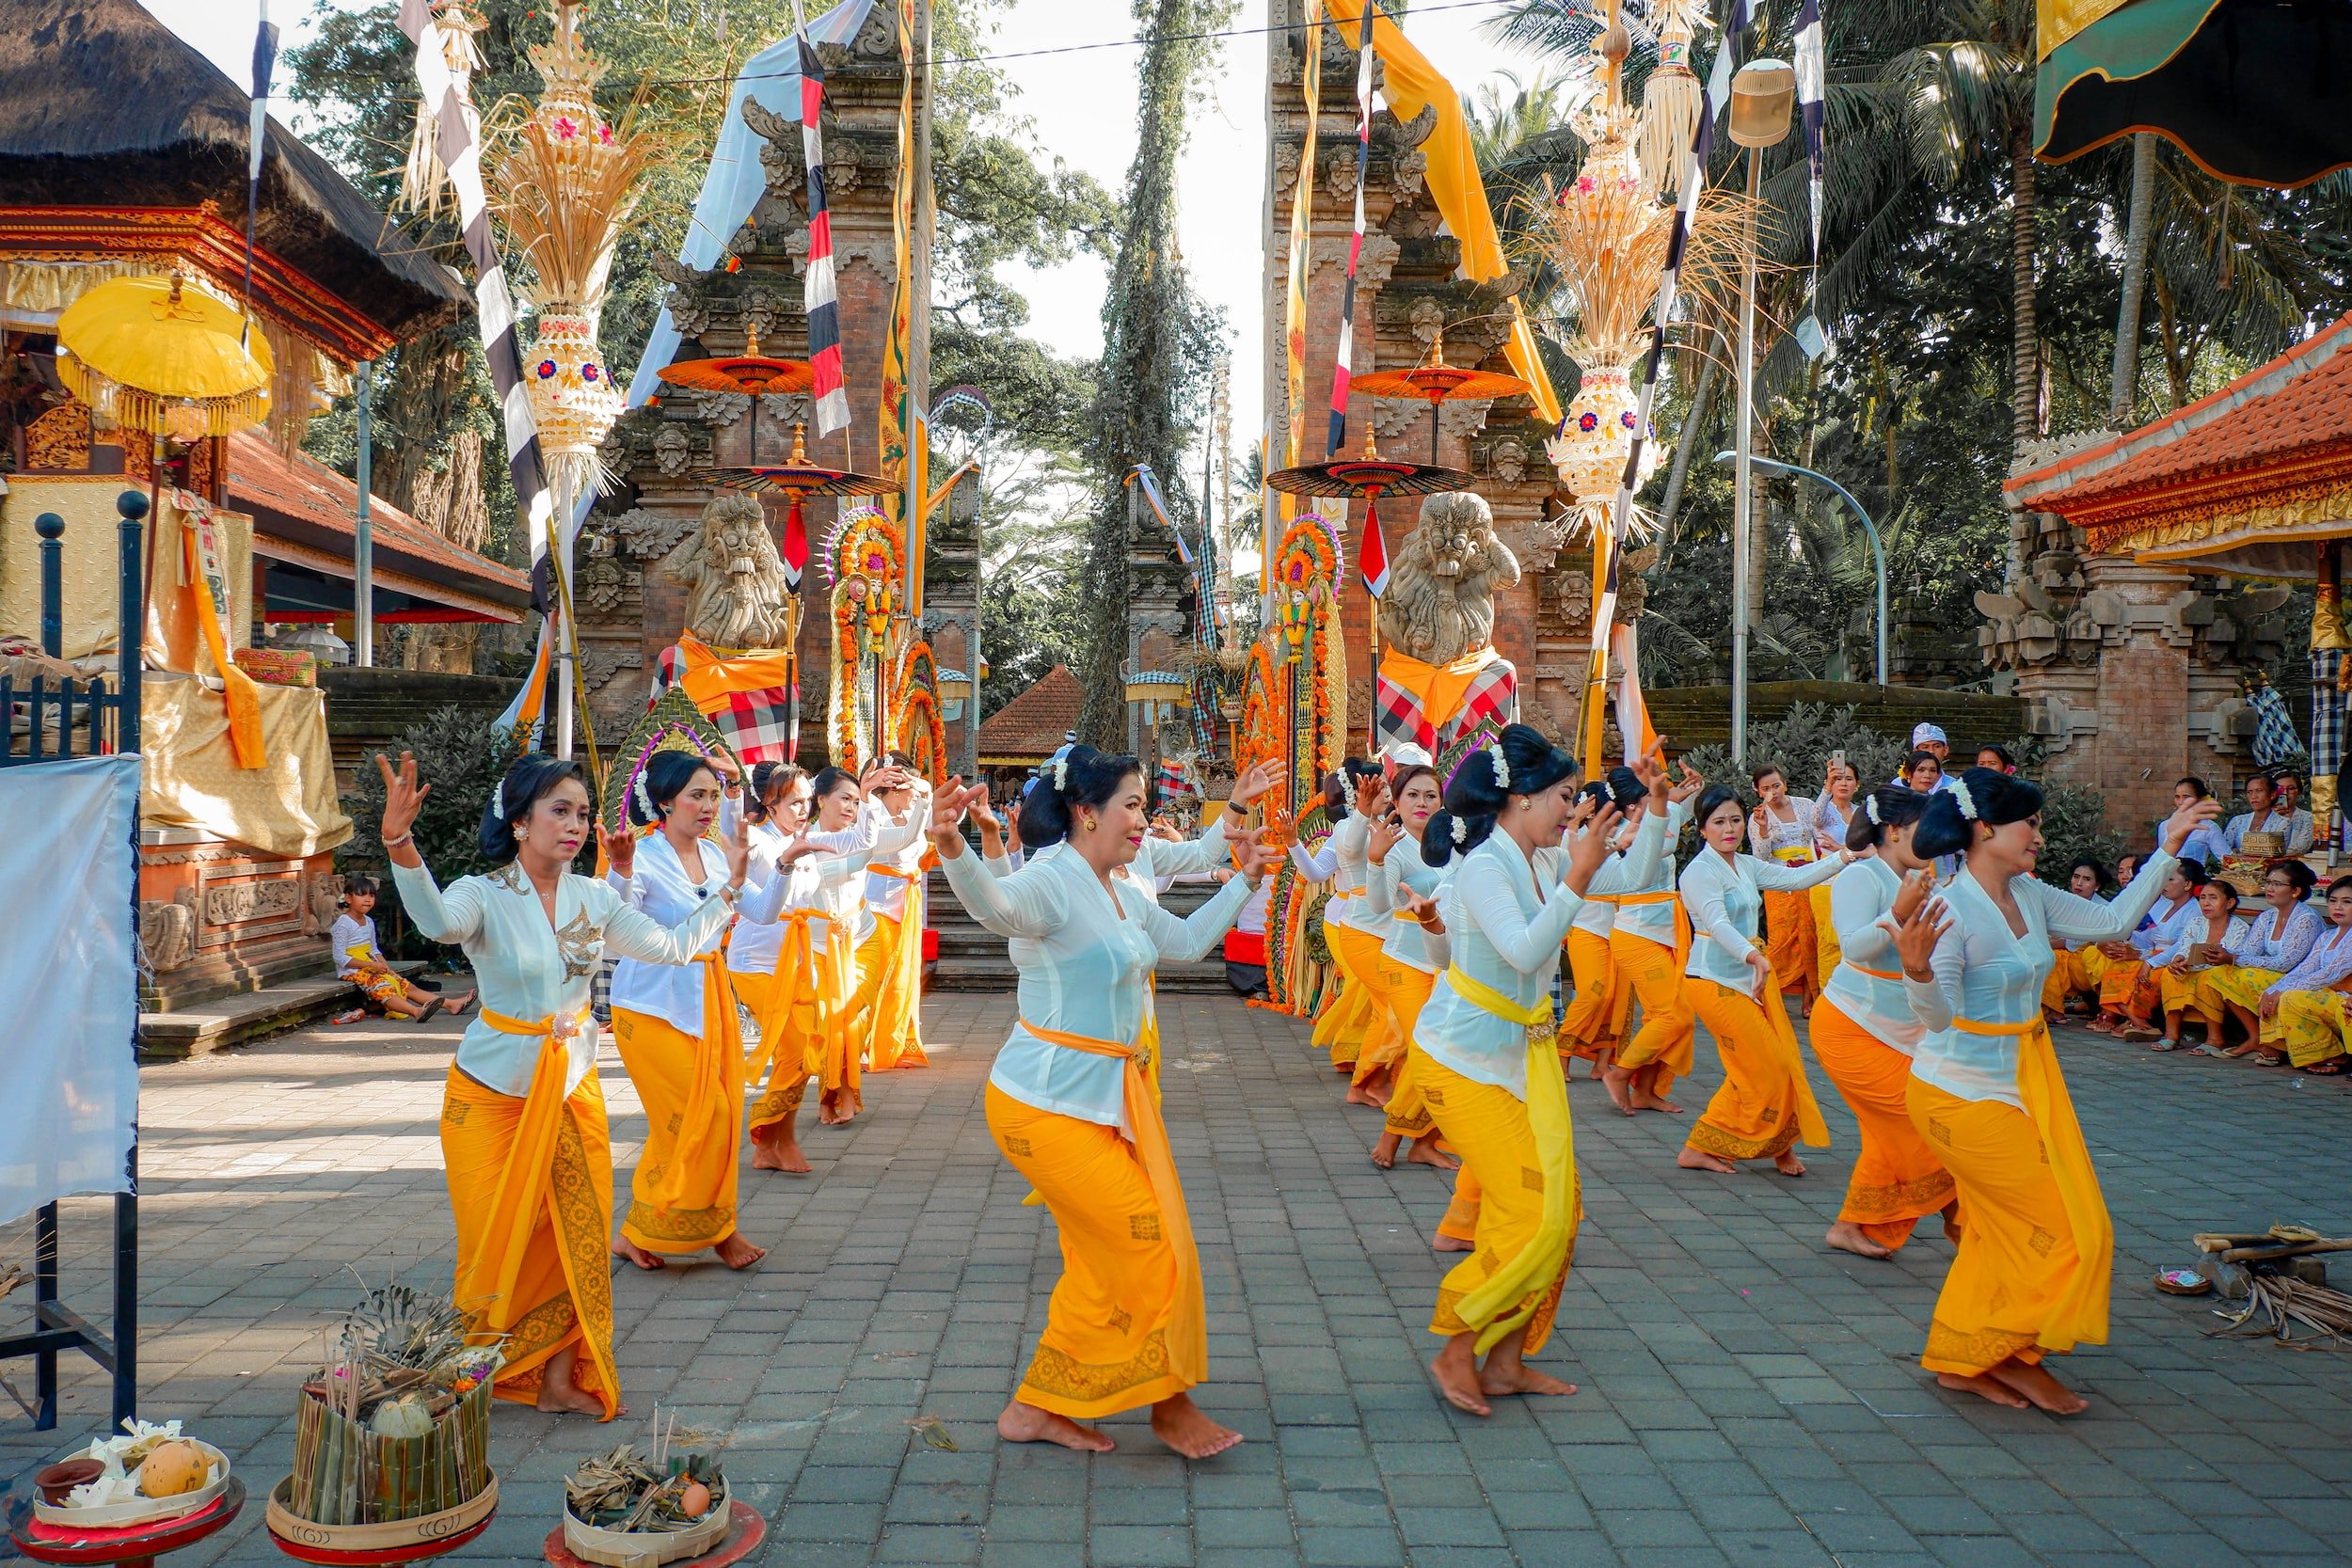 September is the best time to visit Bali for festivals